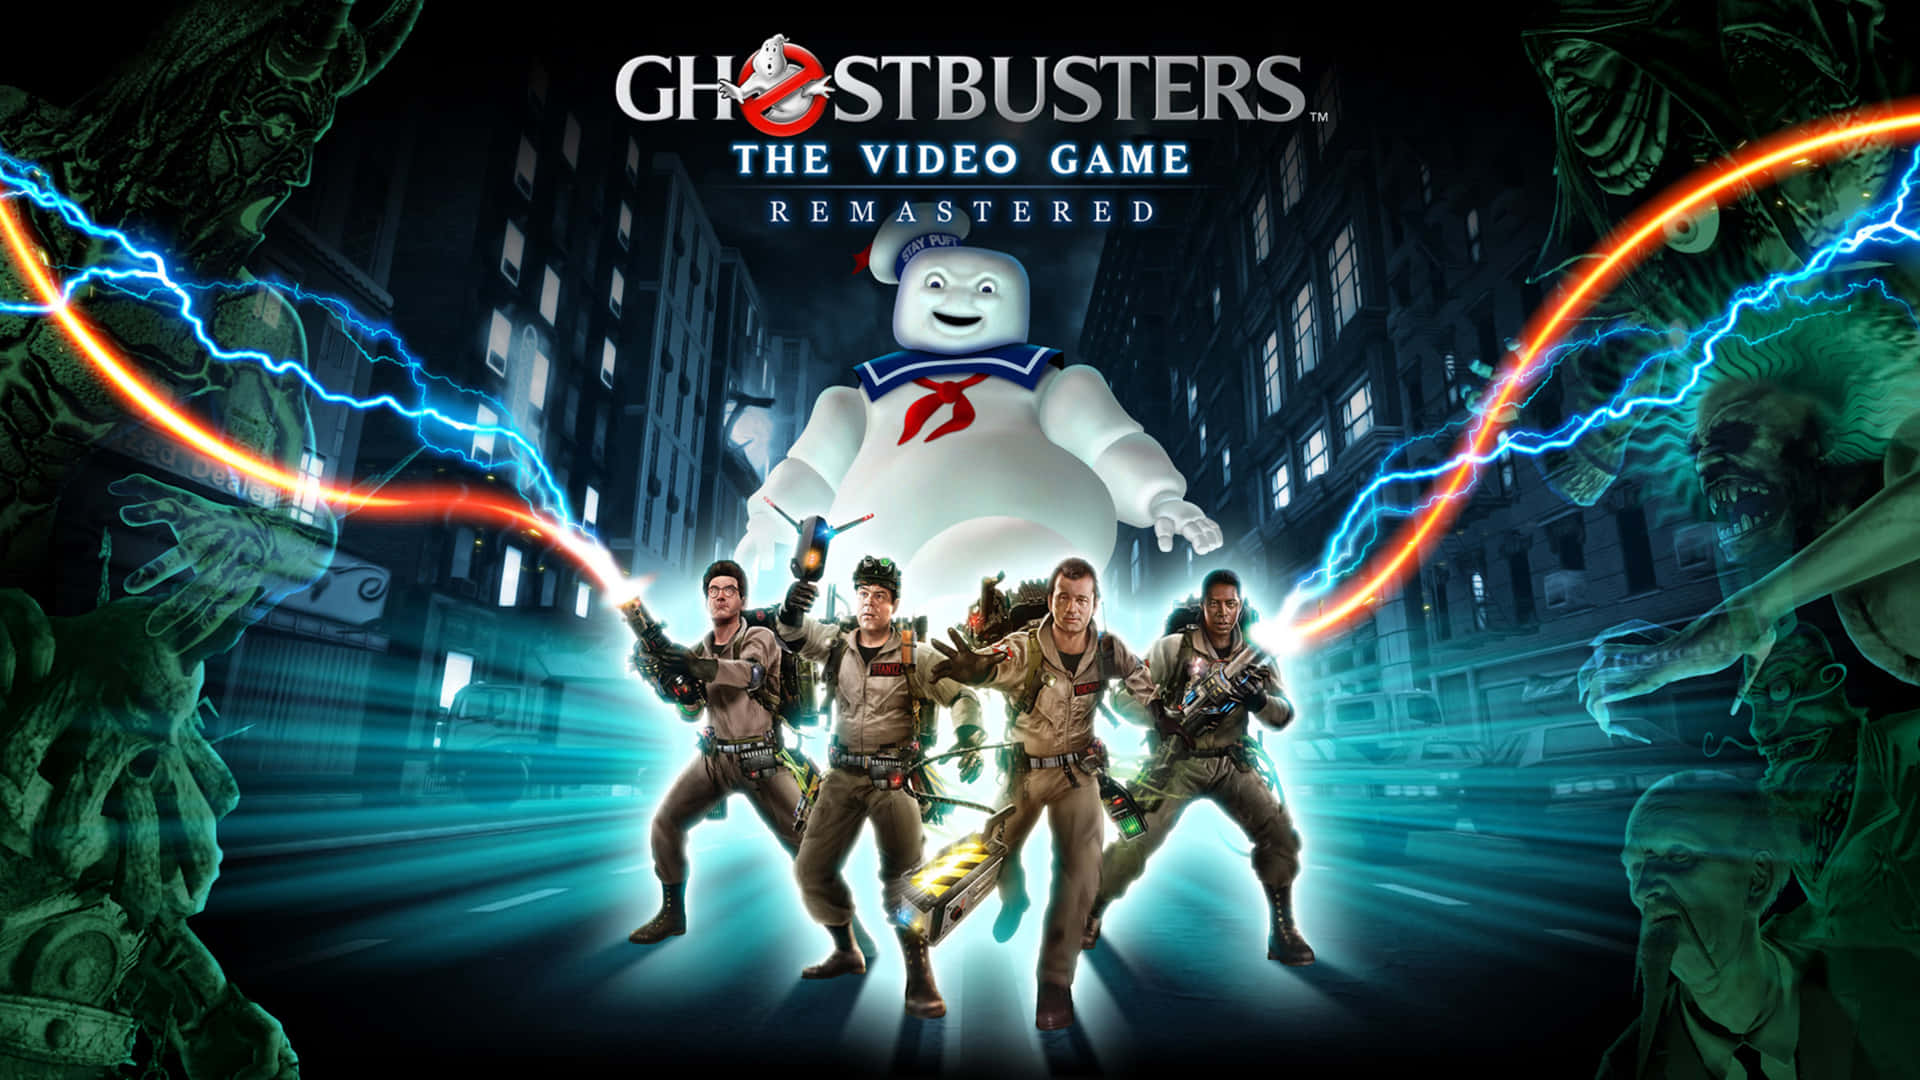 The Classic Team of Ghostbusters in Action